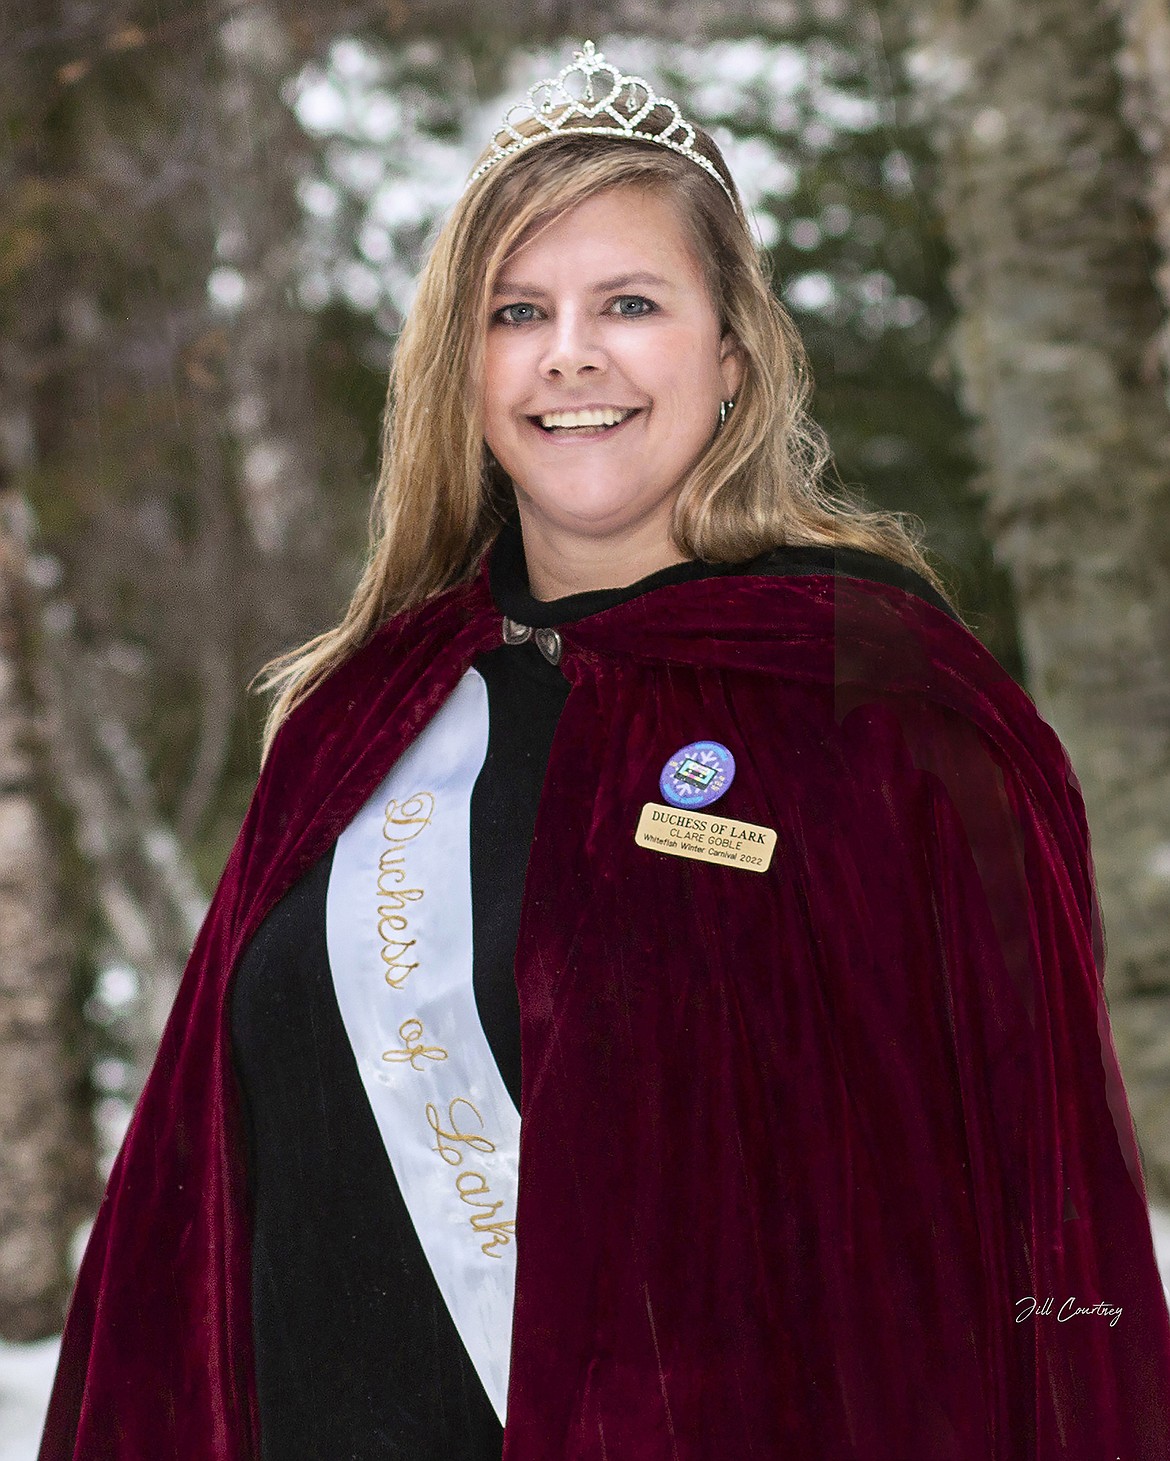 Clare Goble was crowned Duchess of Lark. (Jill Courtney photo)